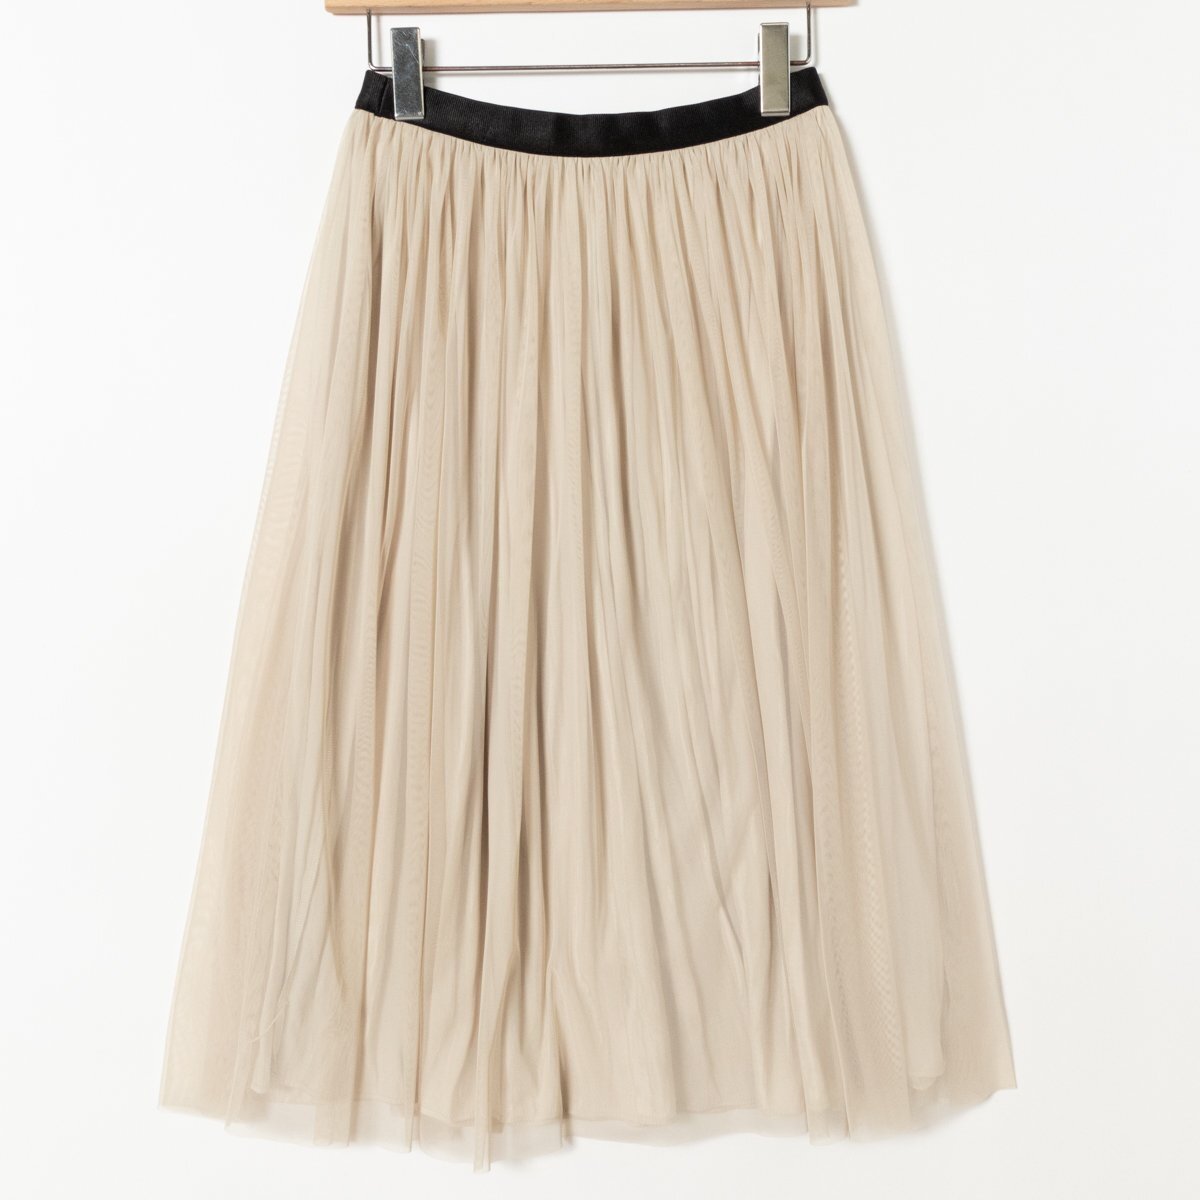 SHIPS Ships chu-ru skirt beige poly- 100 reverse side attaching waist rubber Flare soft knees under height femi person sia- material put on mawashi spring summer 